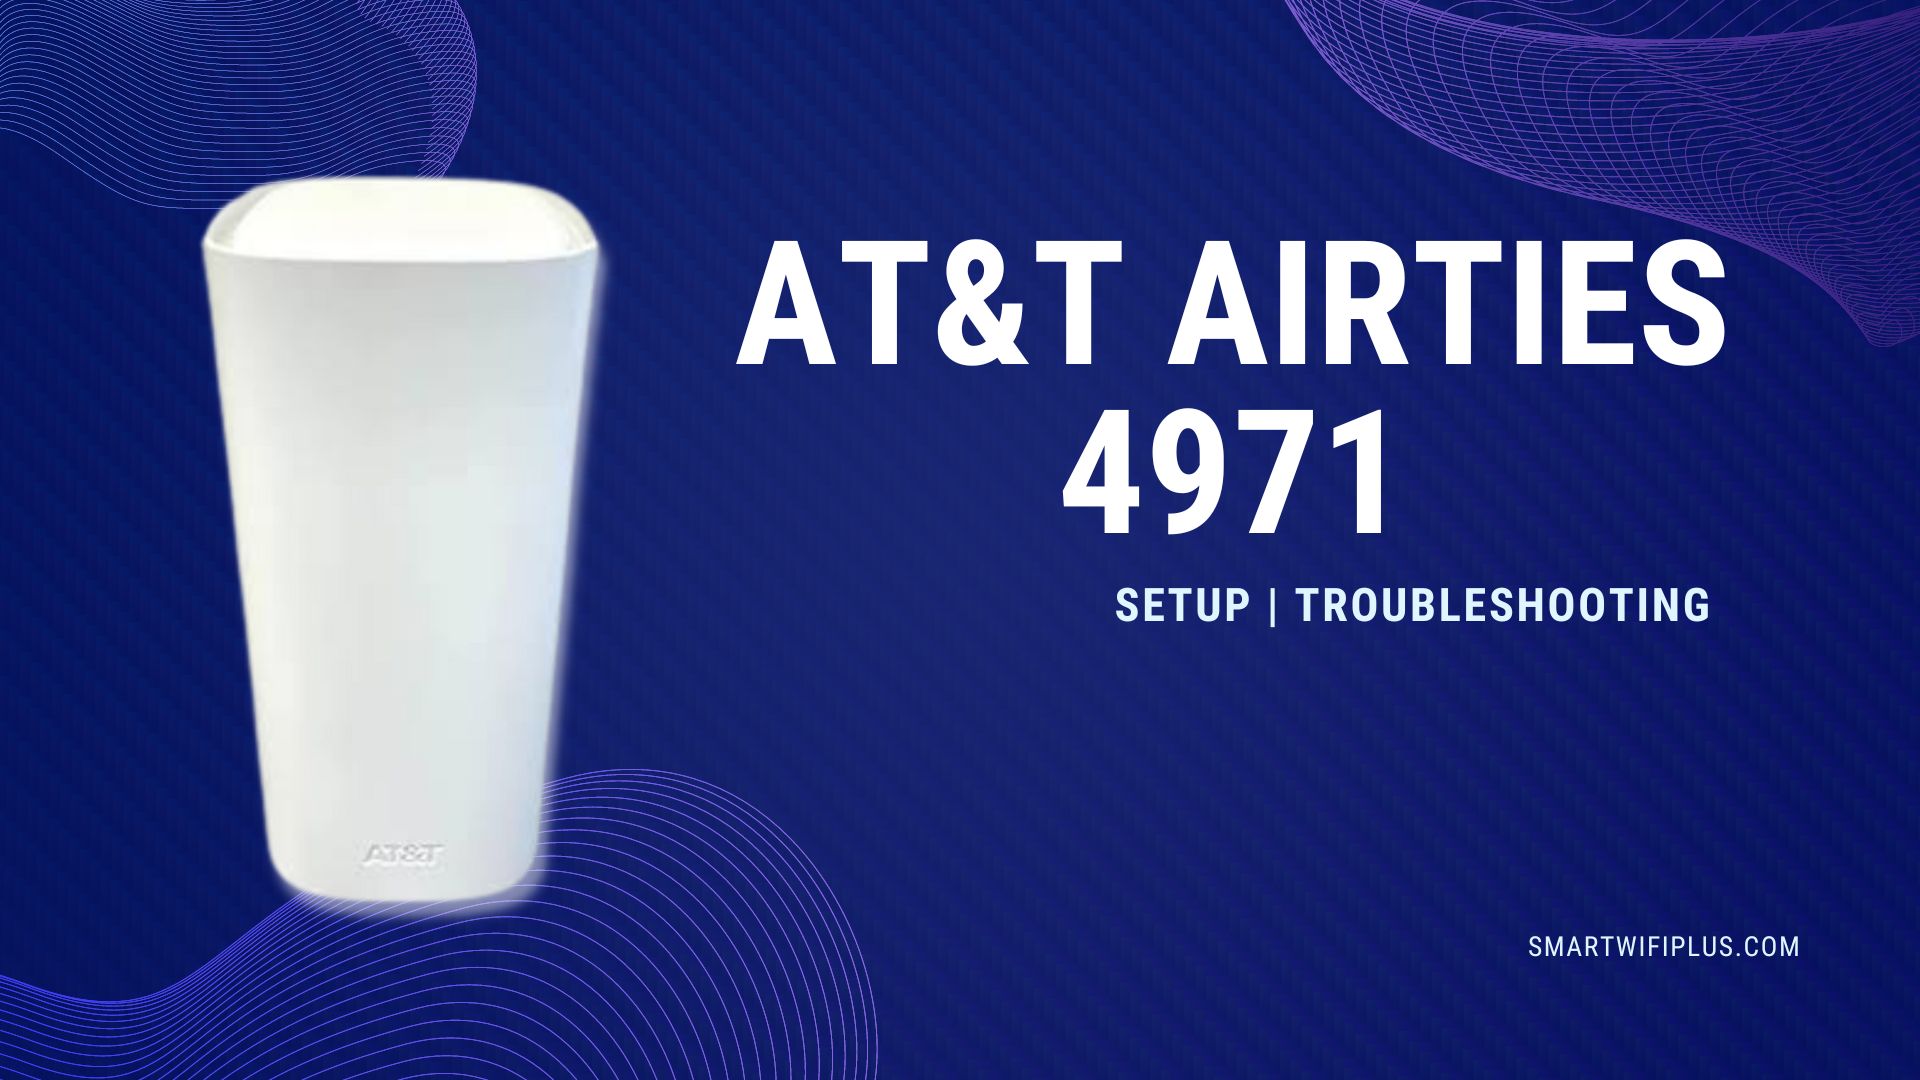 How to Setup AT&T Airties 4971 WIFI Extender?